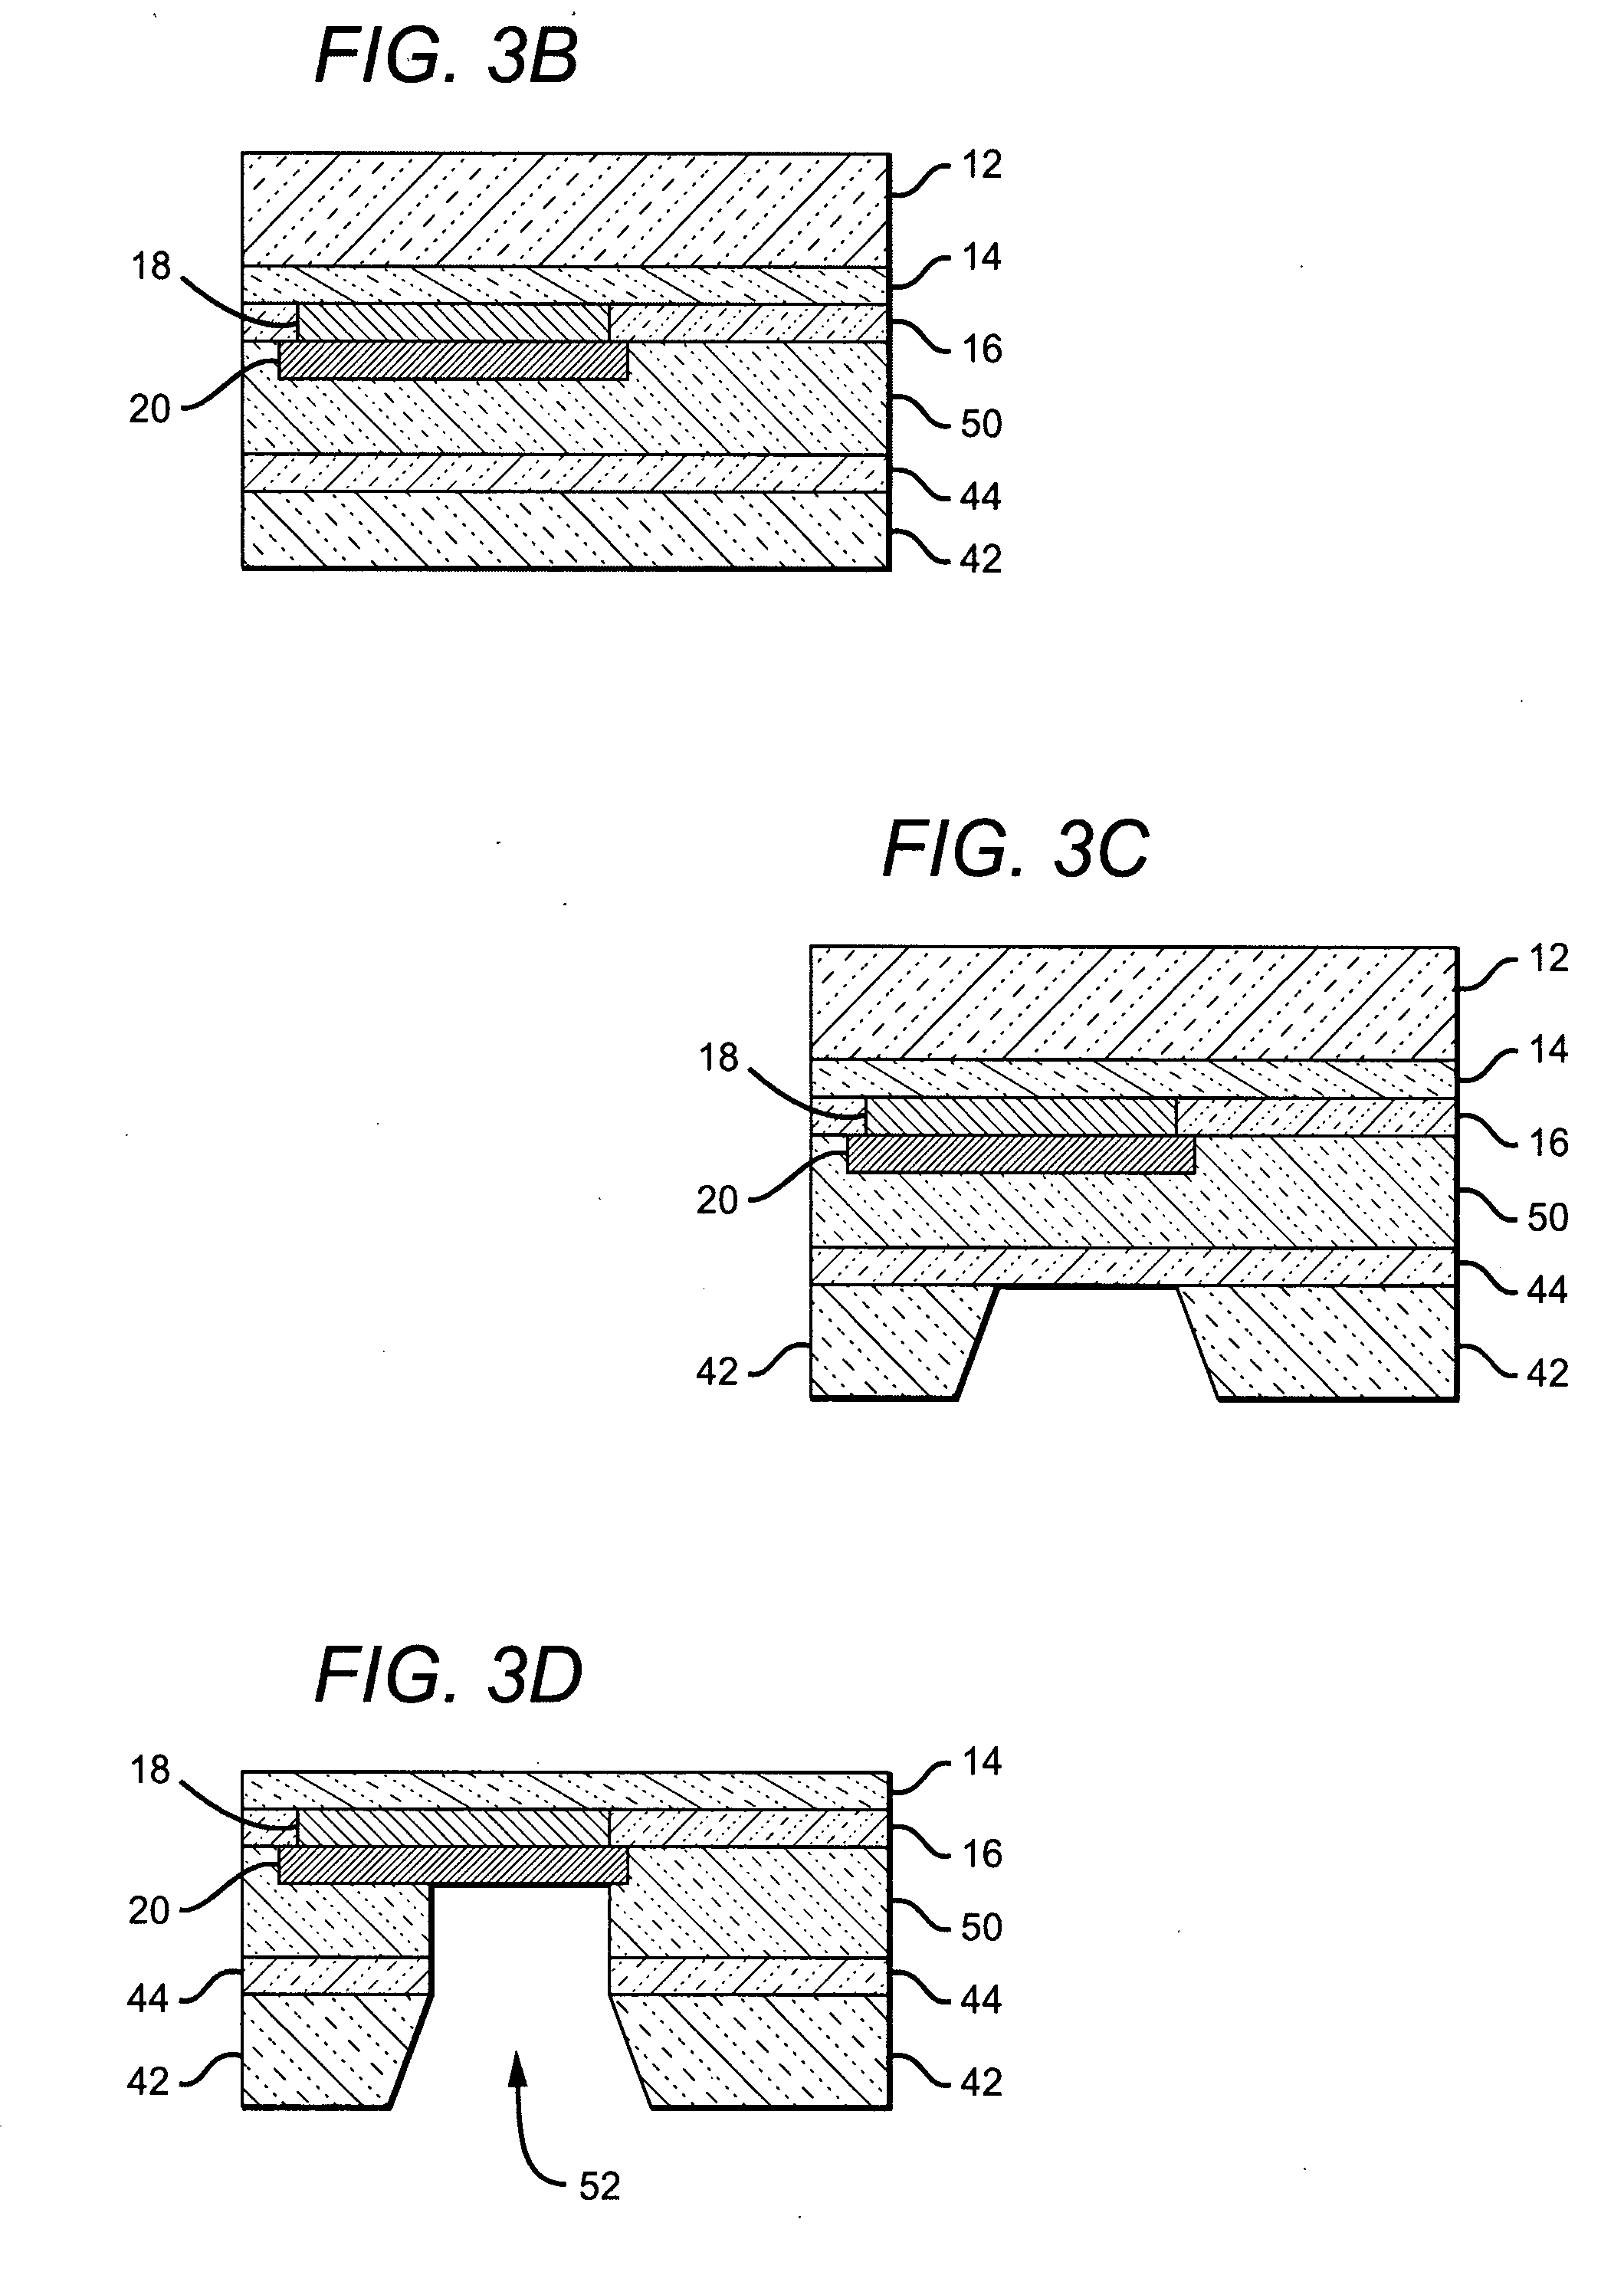 Dielectric wafer level bonding with conductive feed-throughs for electrical connection and thermal management